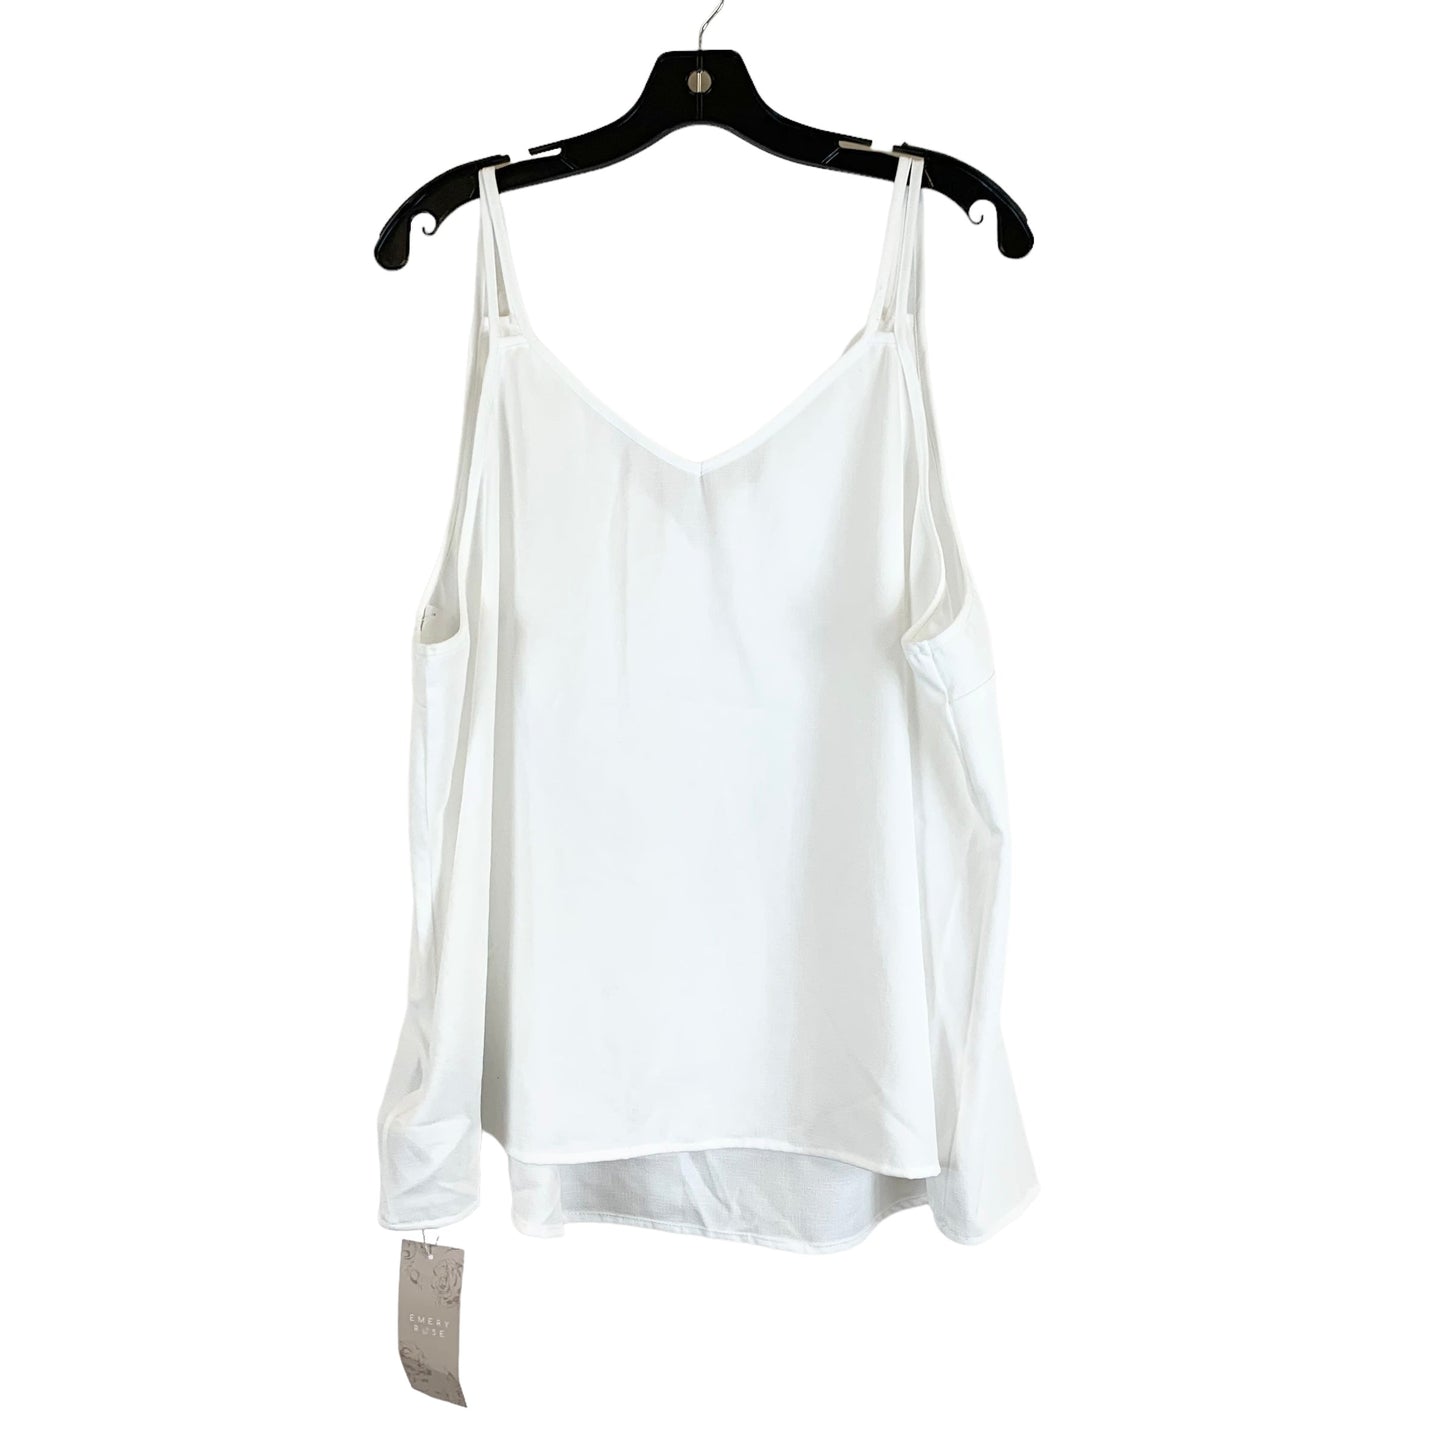 Top Sleeveless By Emery Rose  Size: 4x